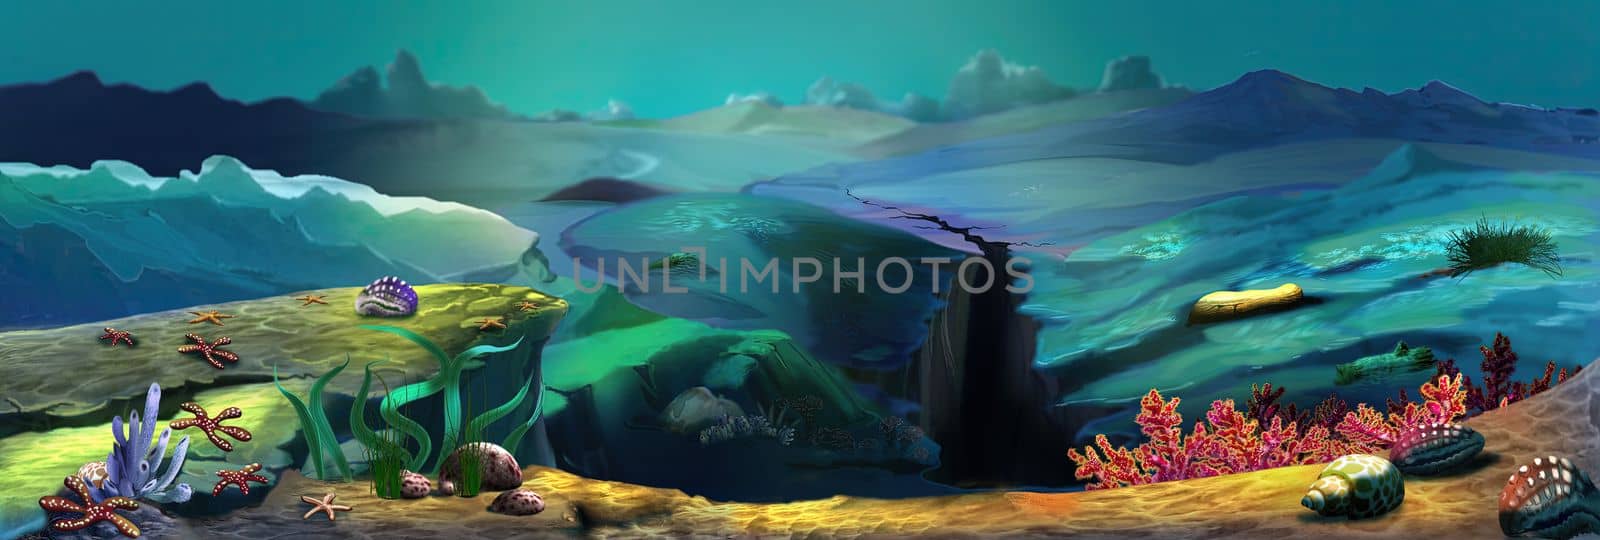 Ocean floor with seaweed and corals illustration by Multipedia